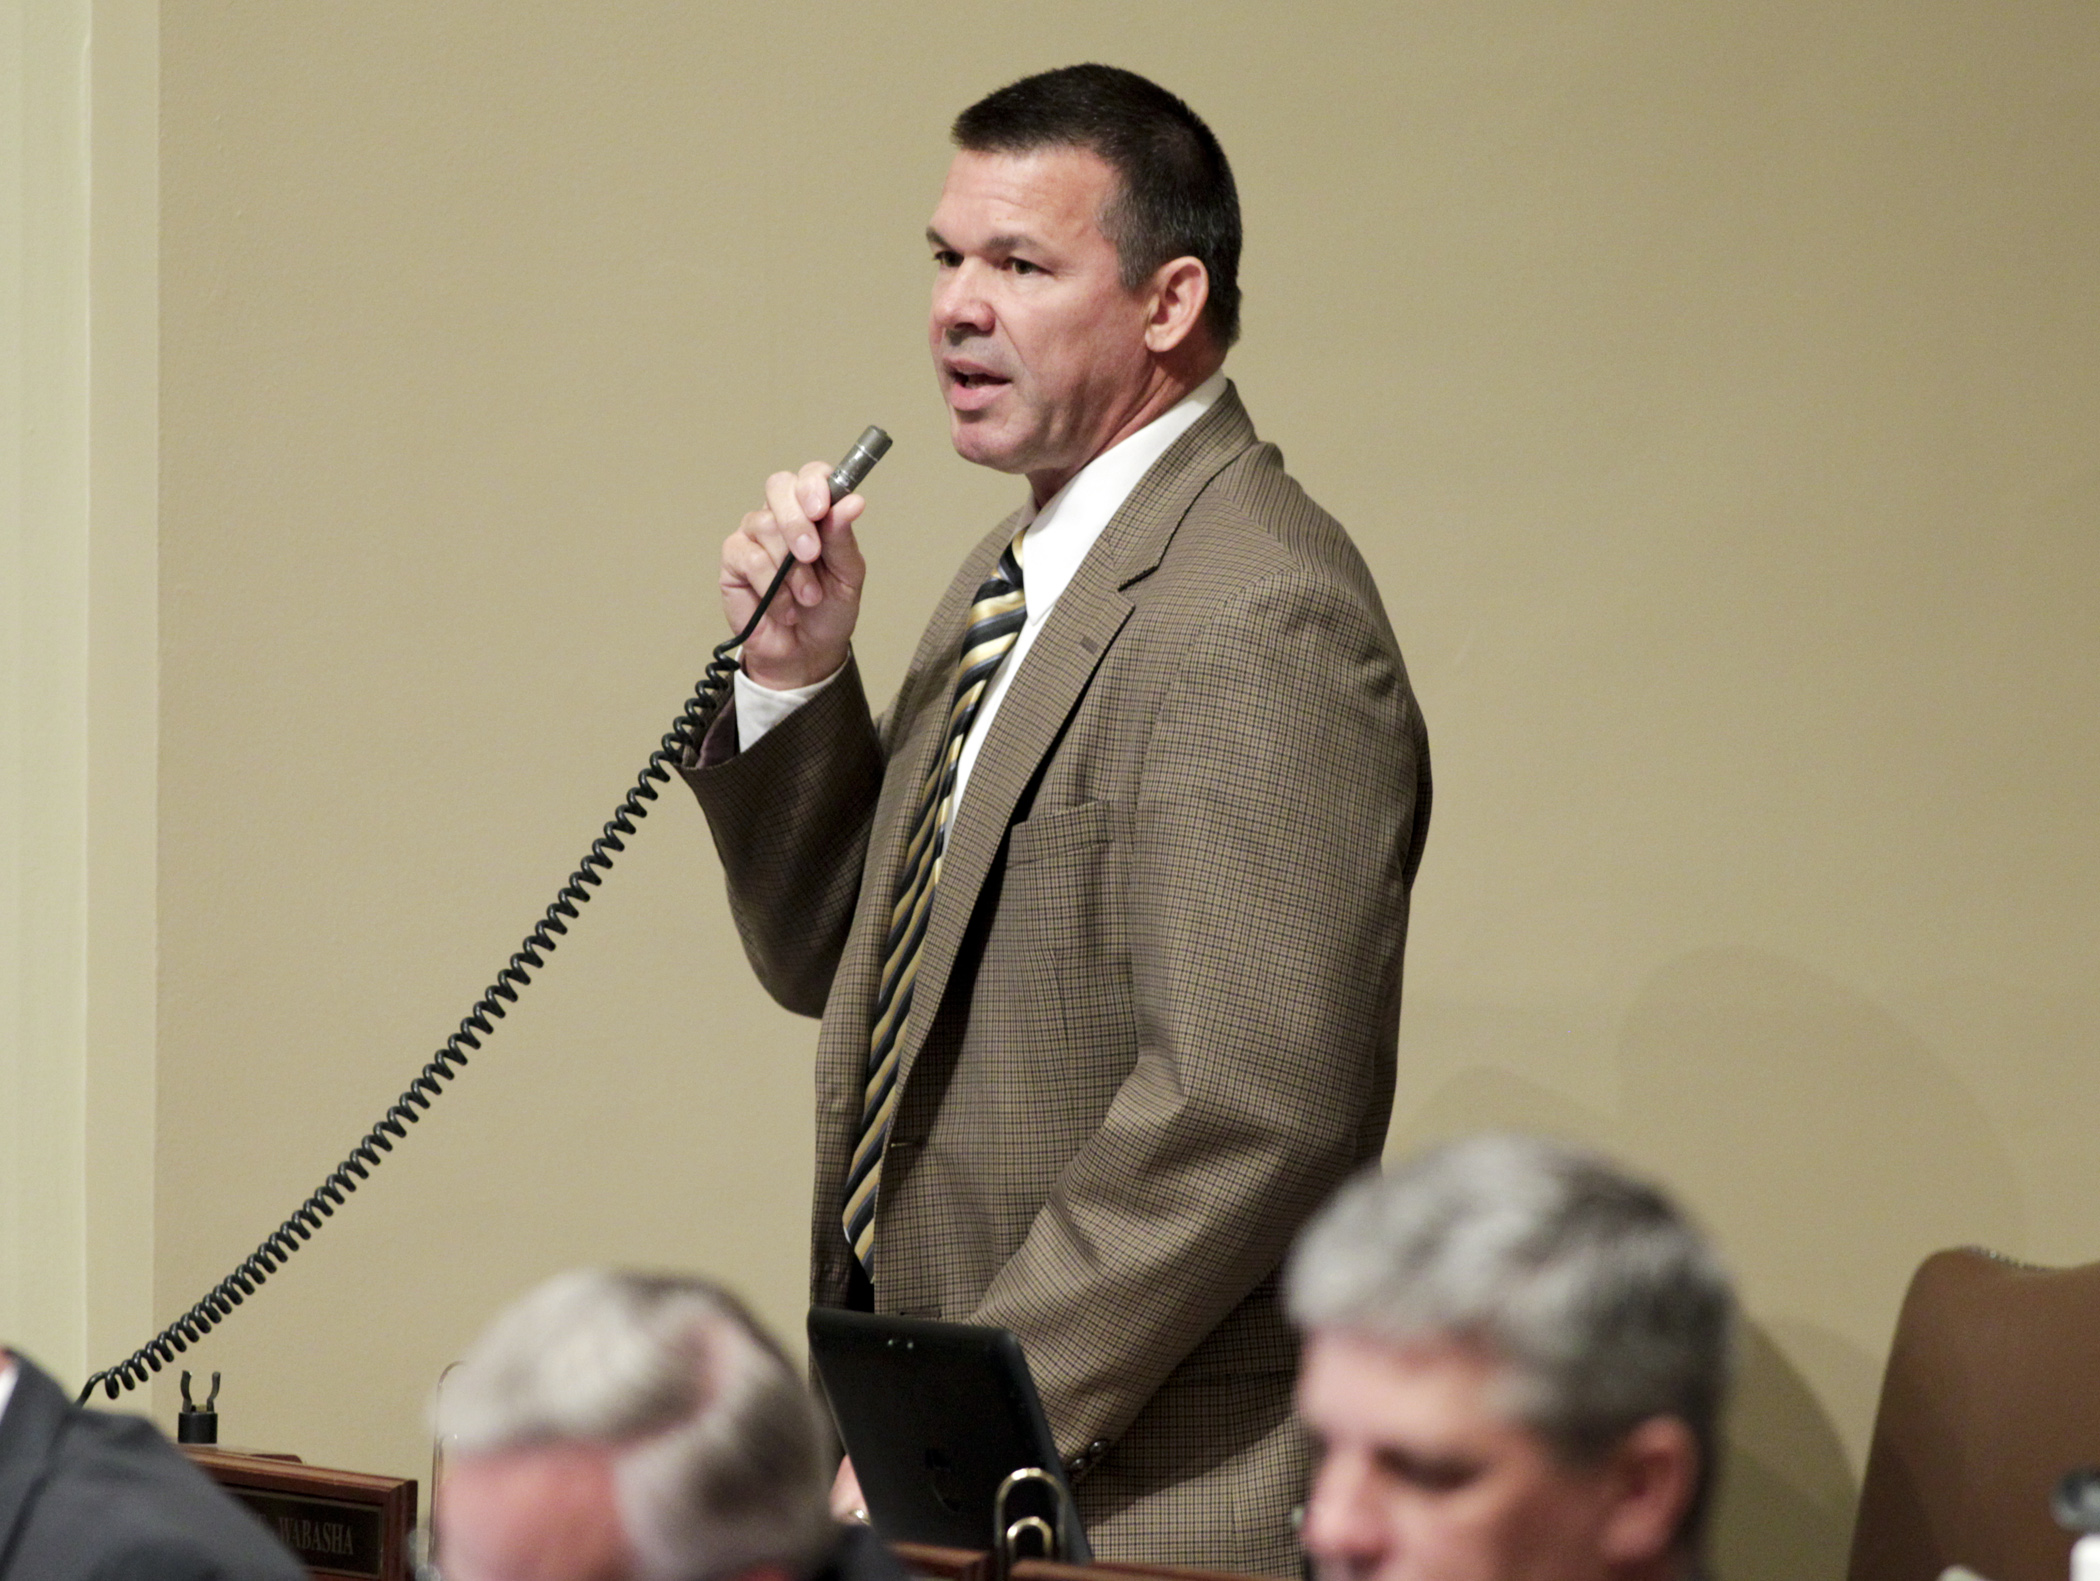 Rep. Tim Kelly, chair of the House Transportation Policy and Finance Committee, explains provisions of the conference committee report on SF1647, the omnibus transportation finance and policy bill, during floor debate May 18. Photo by Paul Battaglia